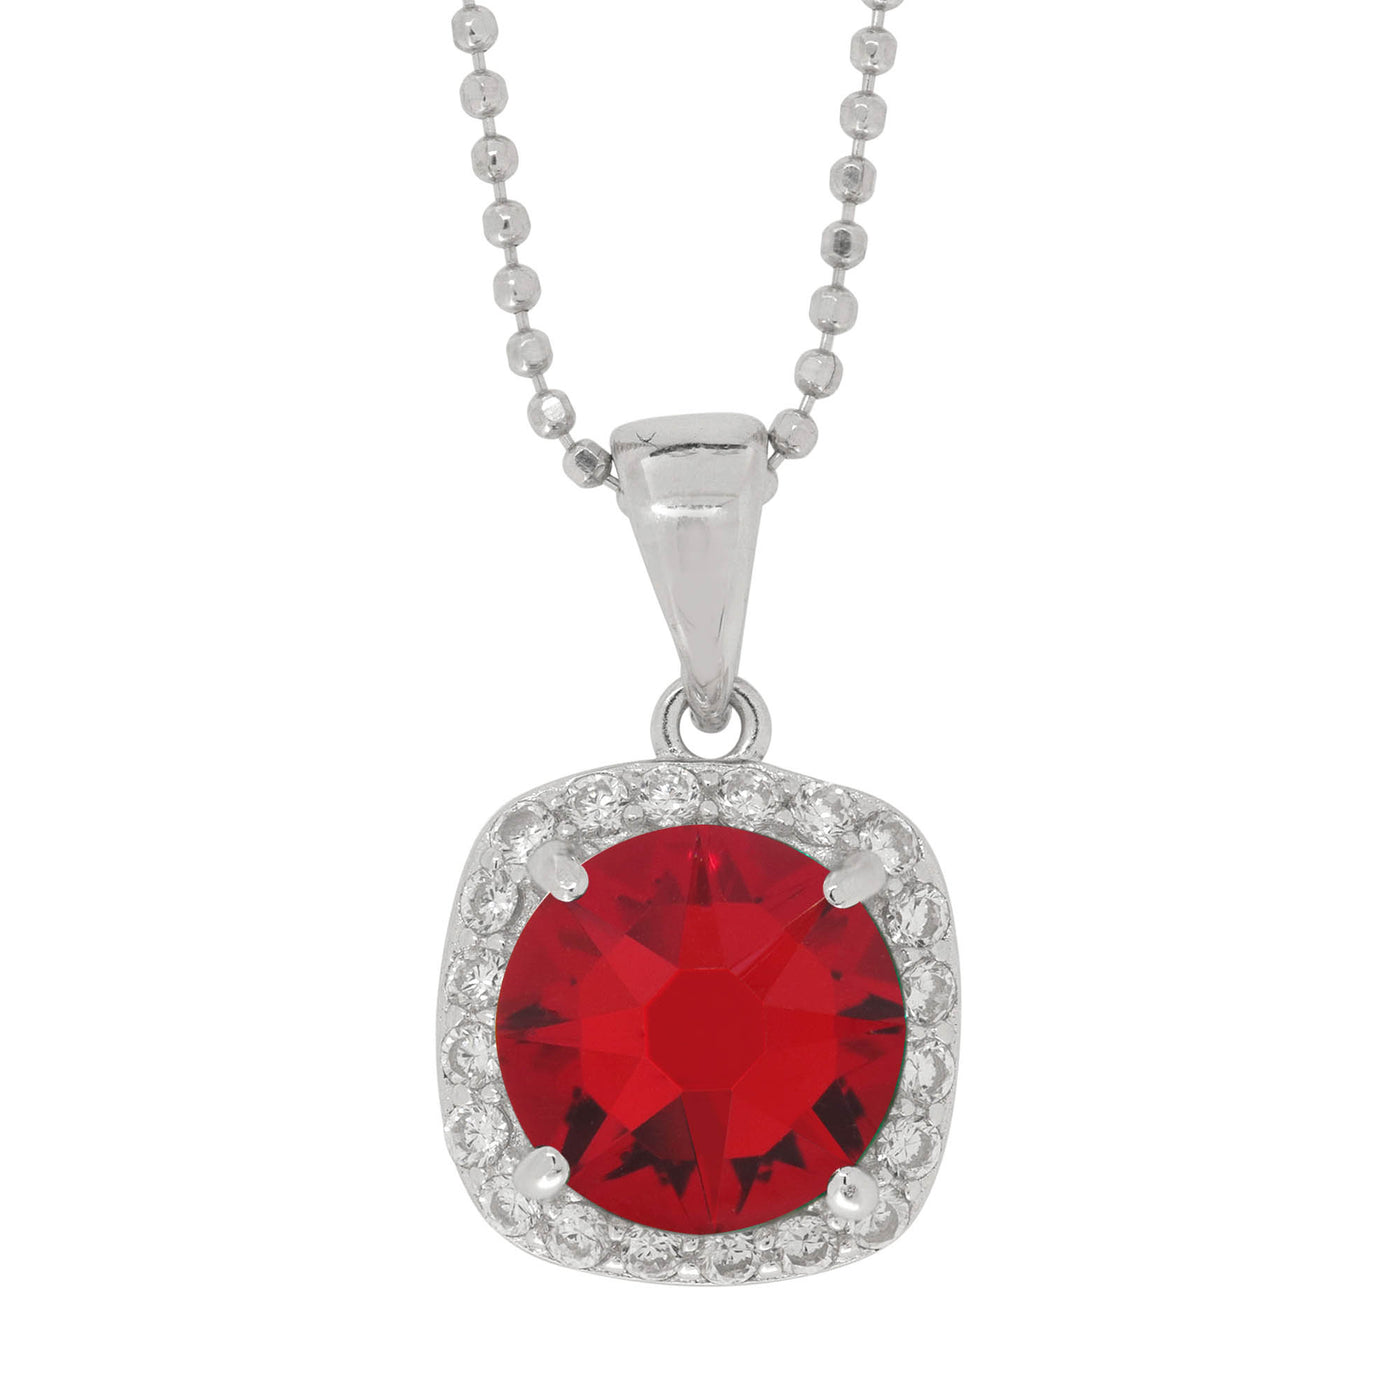 Rebecca Sloane Silver Pave Halo with Light Siam Crystal Pendant